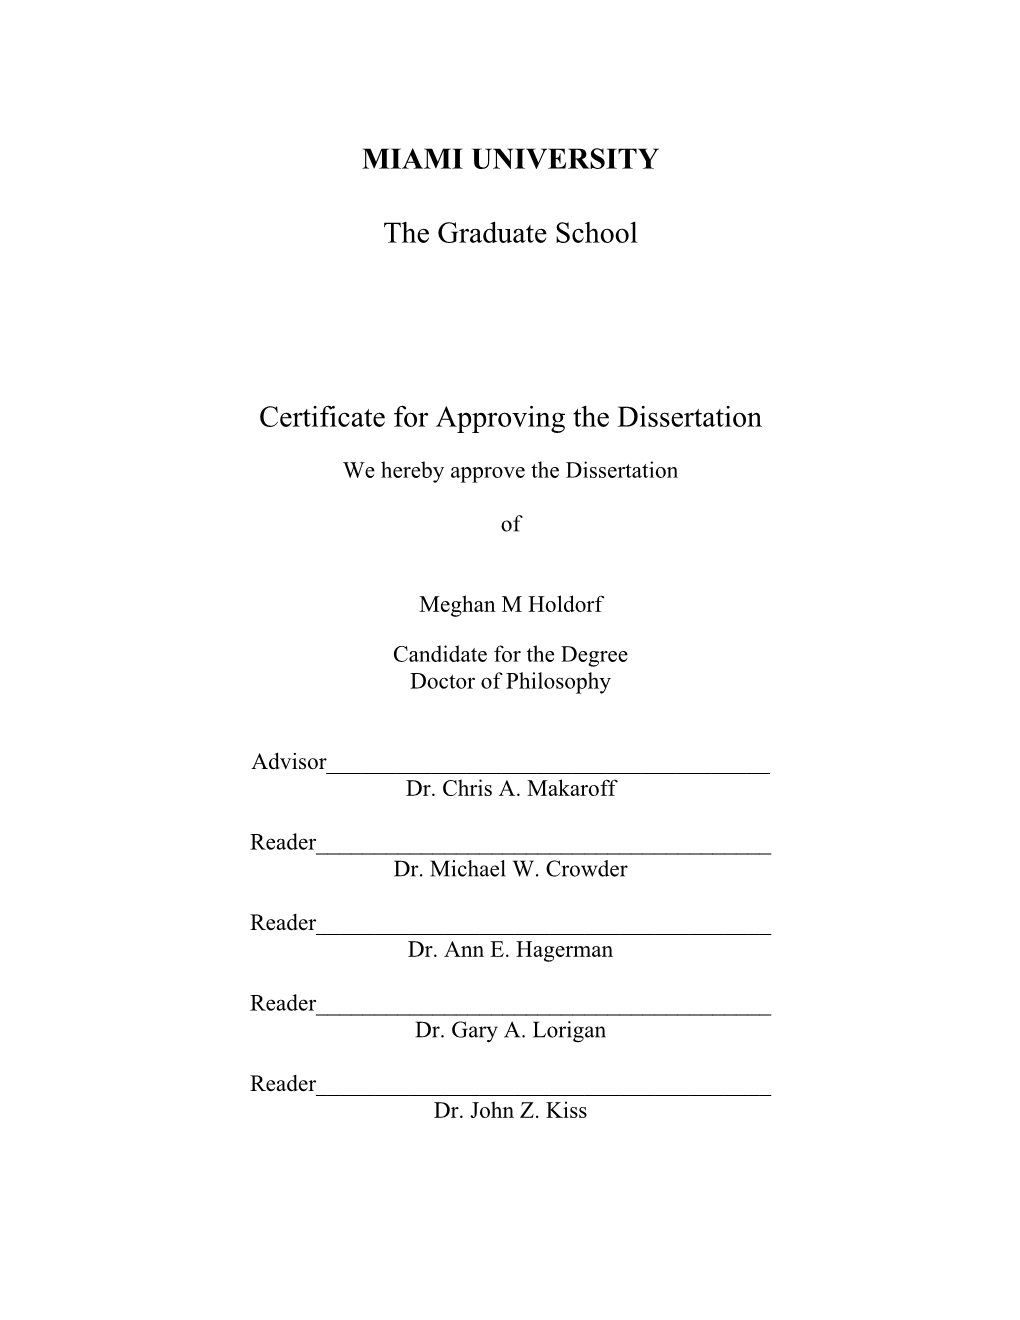 We Hereby Approve the Dissertation Of